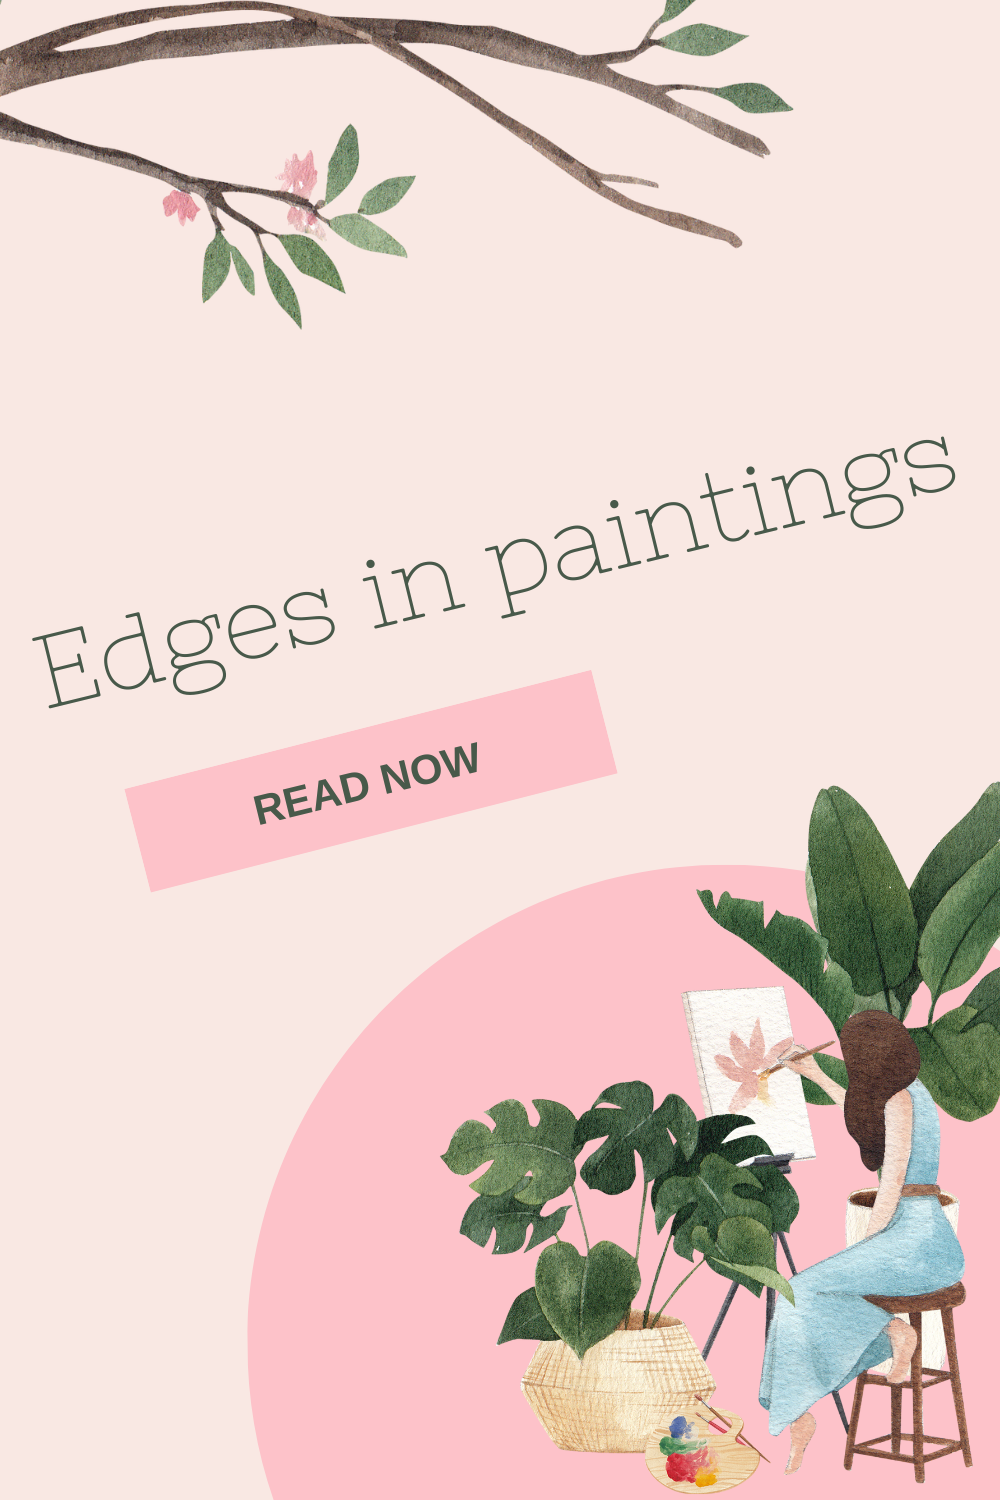 You are currently viewing Edges in paintings